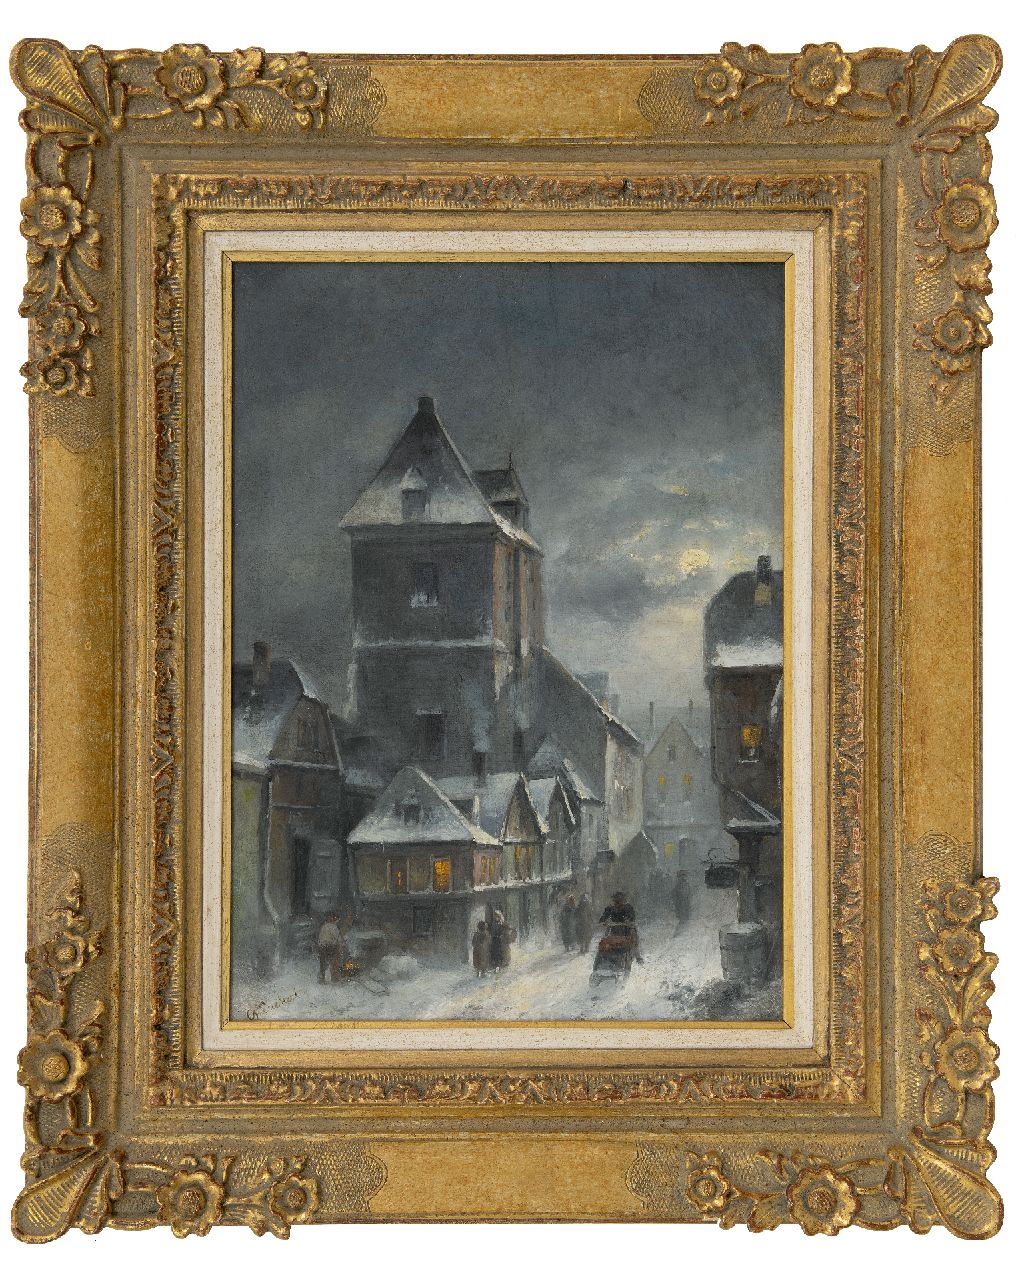 Leickert C.H.J.  | 'Charles' Henri Joseph Leickert | Paintings offered for sale | Winter cityscape at early evening, oil on canvas 42.6 x 30.6 cm, signed l.l. and ca. 1895